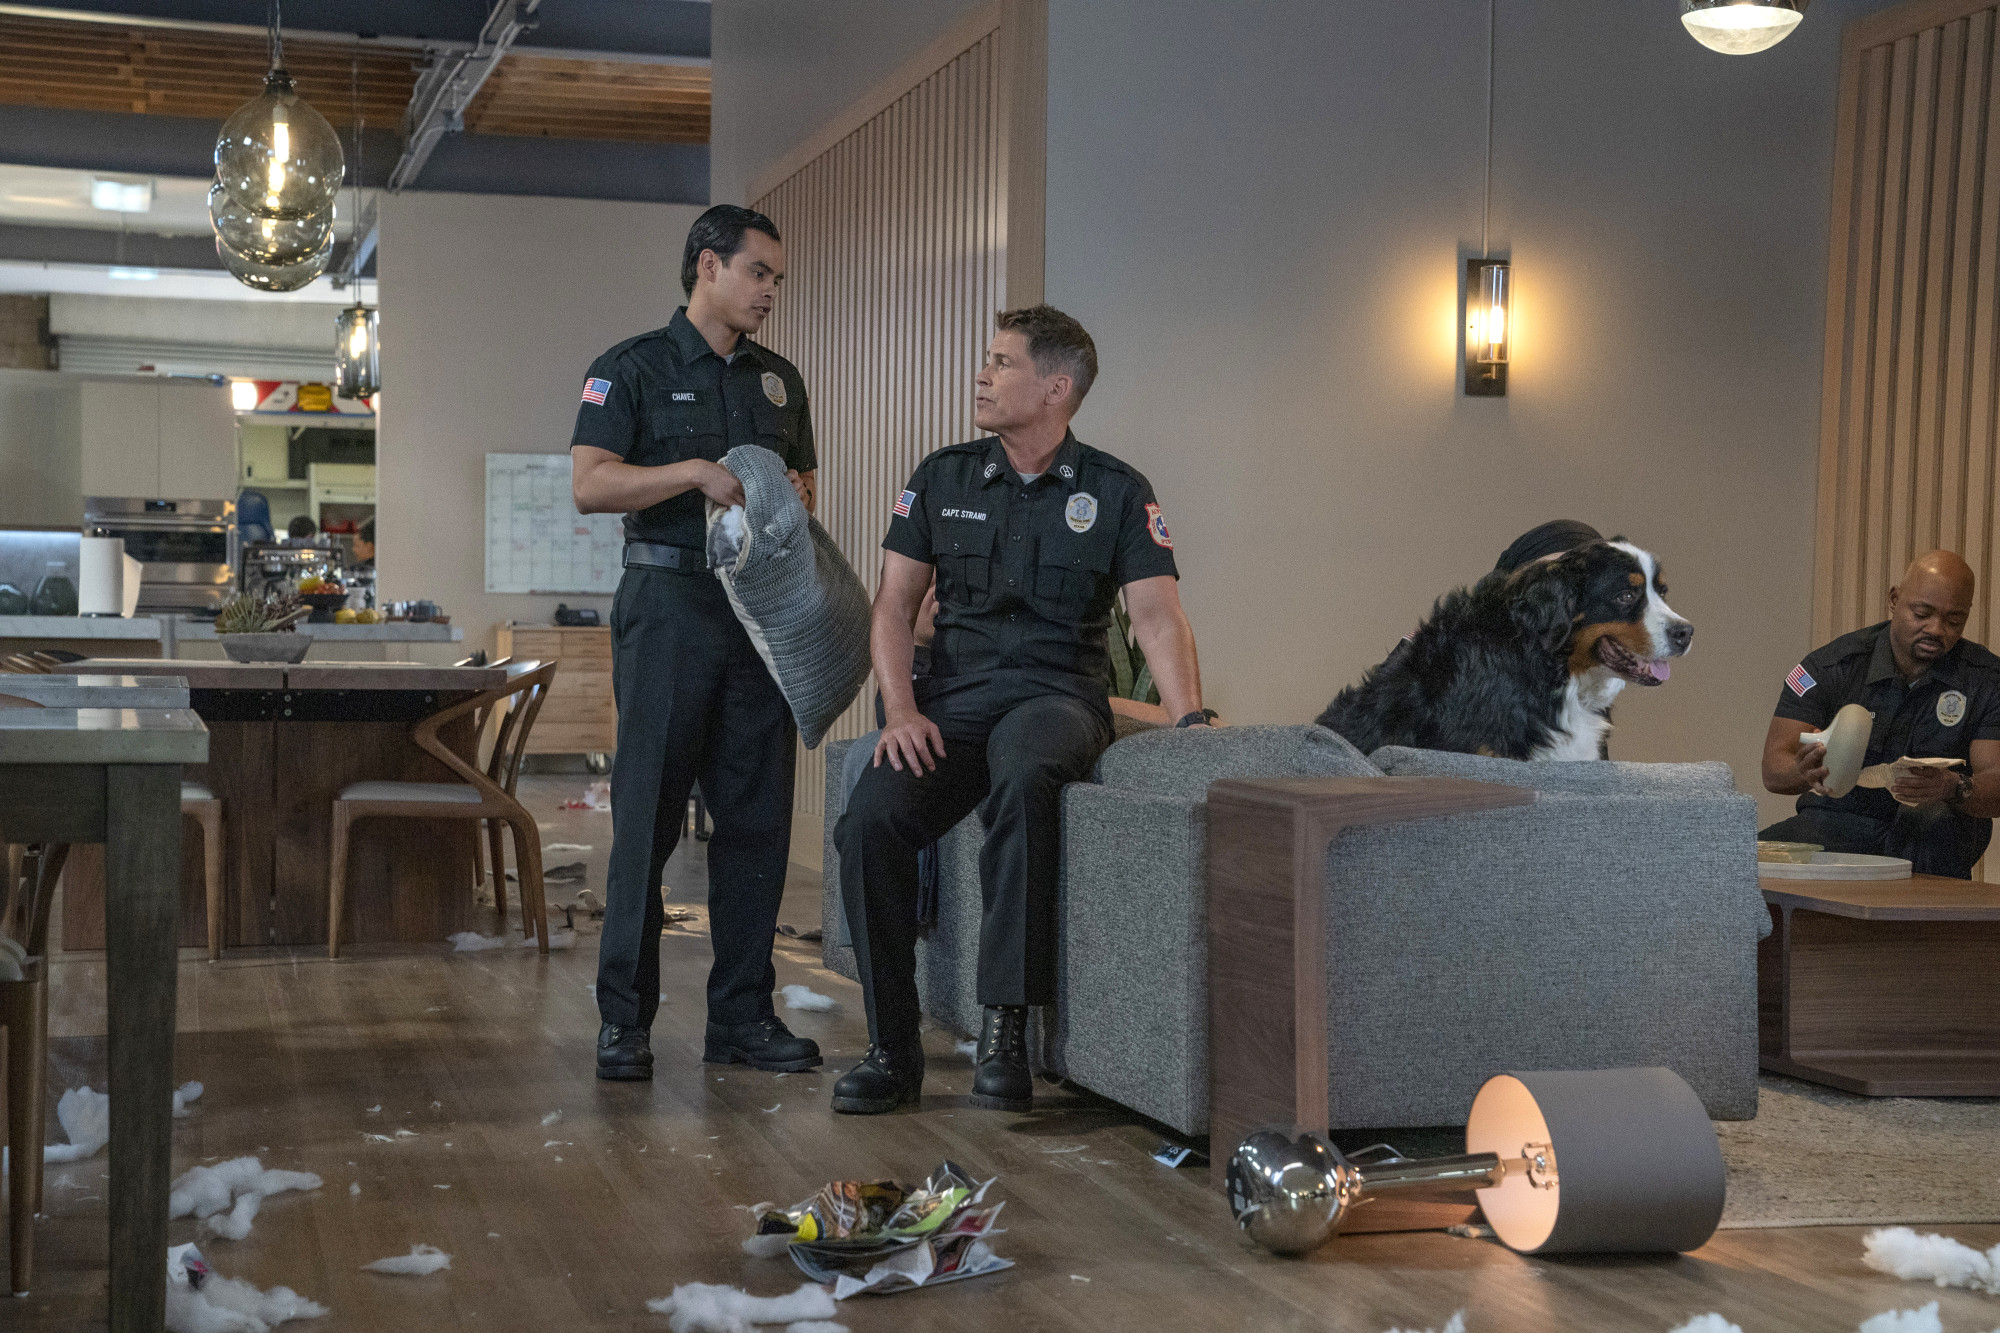 9-1-1: LONE STAR: L-R: Julian Works, Rob Lowe and Brian Michael Smith in the “Monster Inside” episode of 9-1-1: LONE STAR airing Monday, March 2 (8:00-9:01 PM ET/PT) on FOX. ©2020 Fox Media LLC. CR: Jack Zeman/FOX.